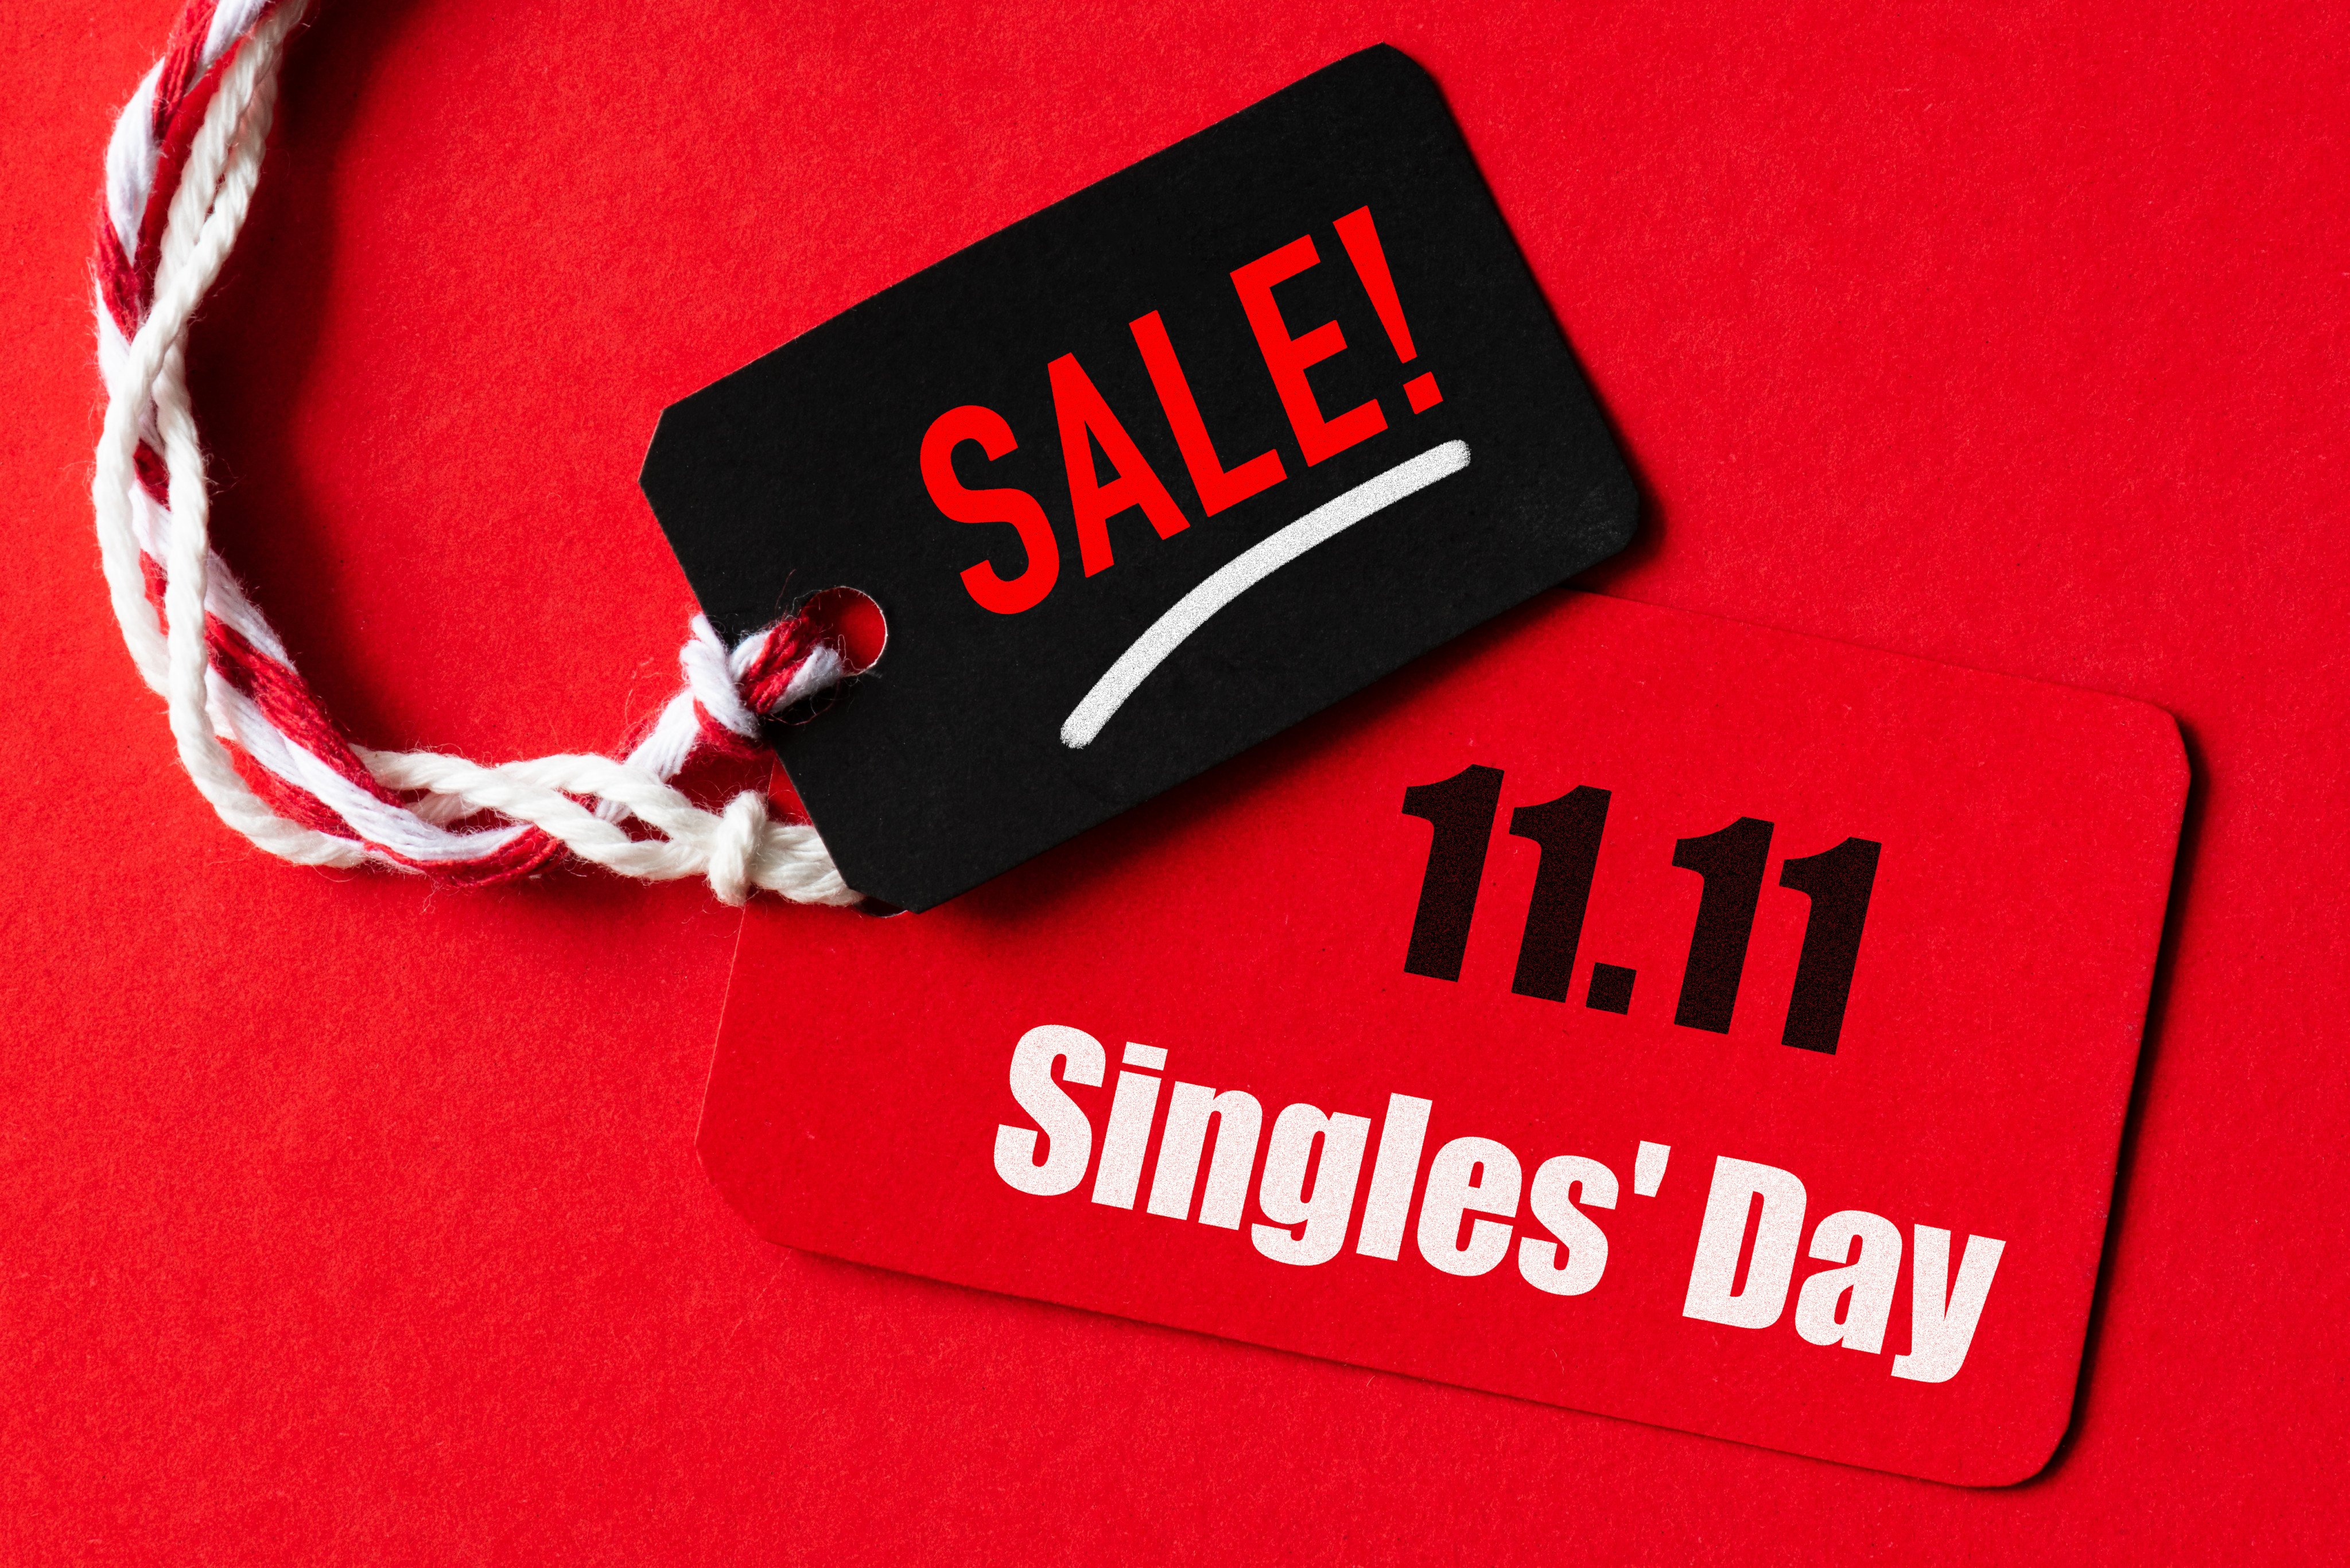 Singles’ Day, known as the world’s largest online shopping festival, is seen as an important barometer of consumer spending in China. Photo: Shutterstock